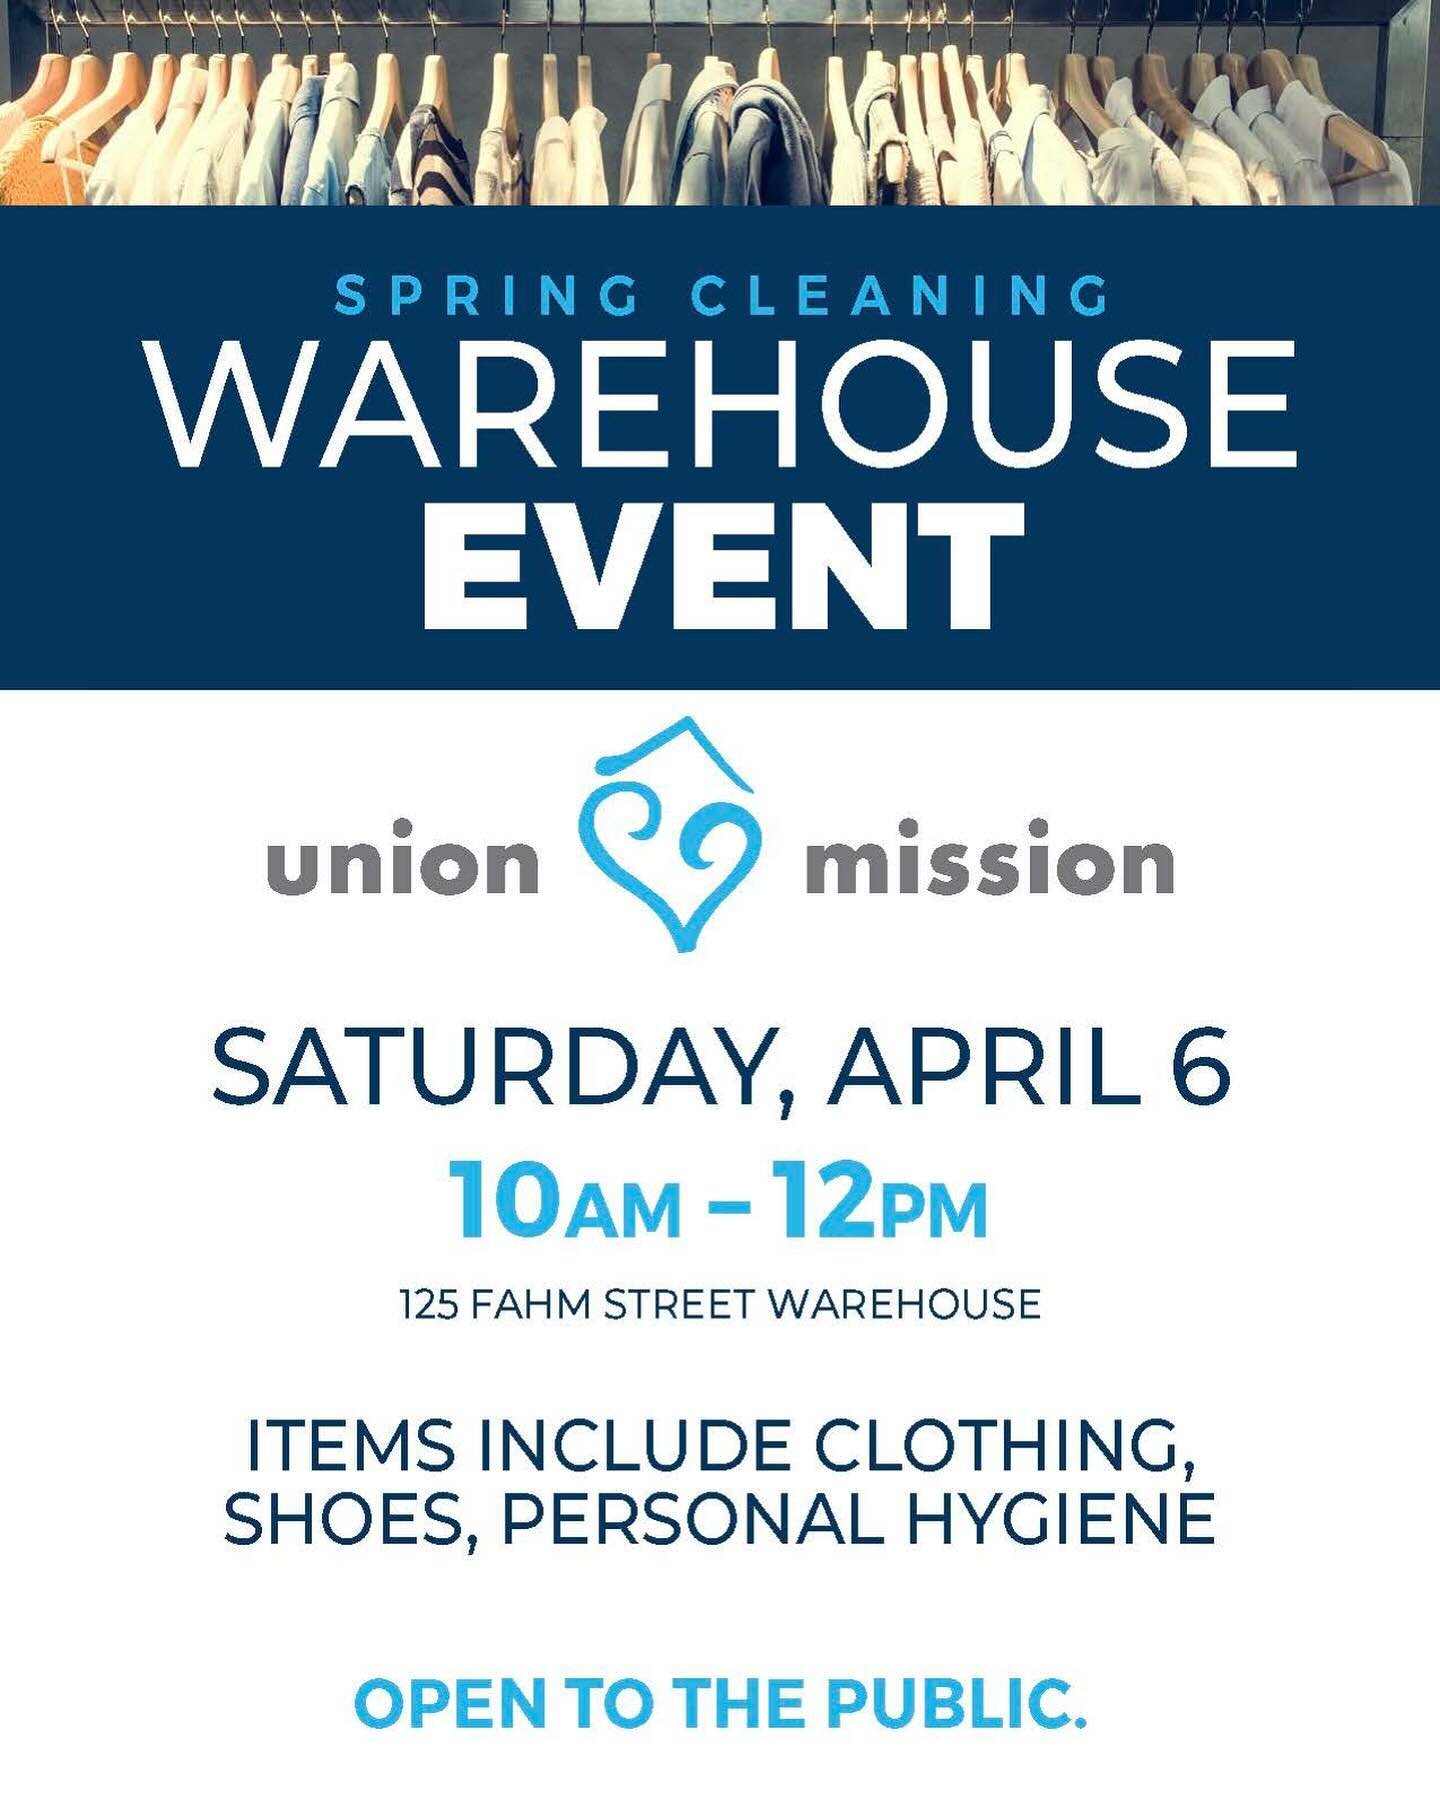 Spring Cleaning with a purpose! 

This Saturday, we&rsquo;re at our 125 Fahm Street Warehouse from 10am-12pm giving out clothes, shoes, and hygiene items to anyone in need. It&rsquo;s a community event for everyone. See you there!